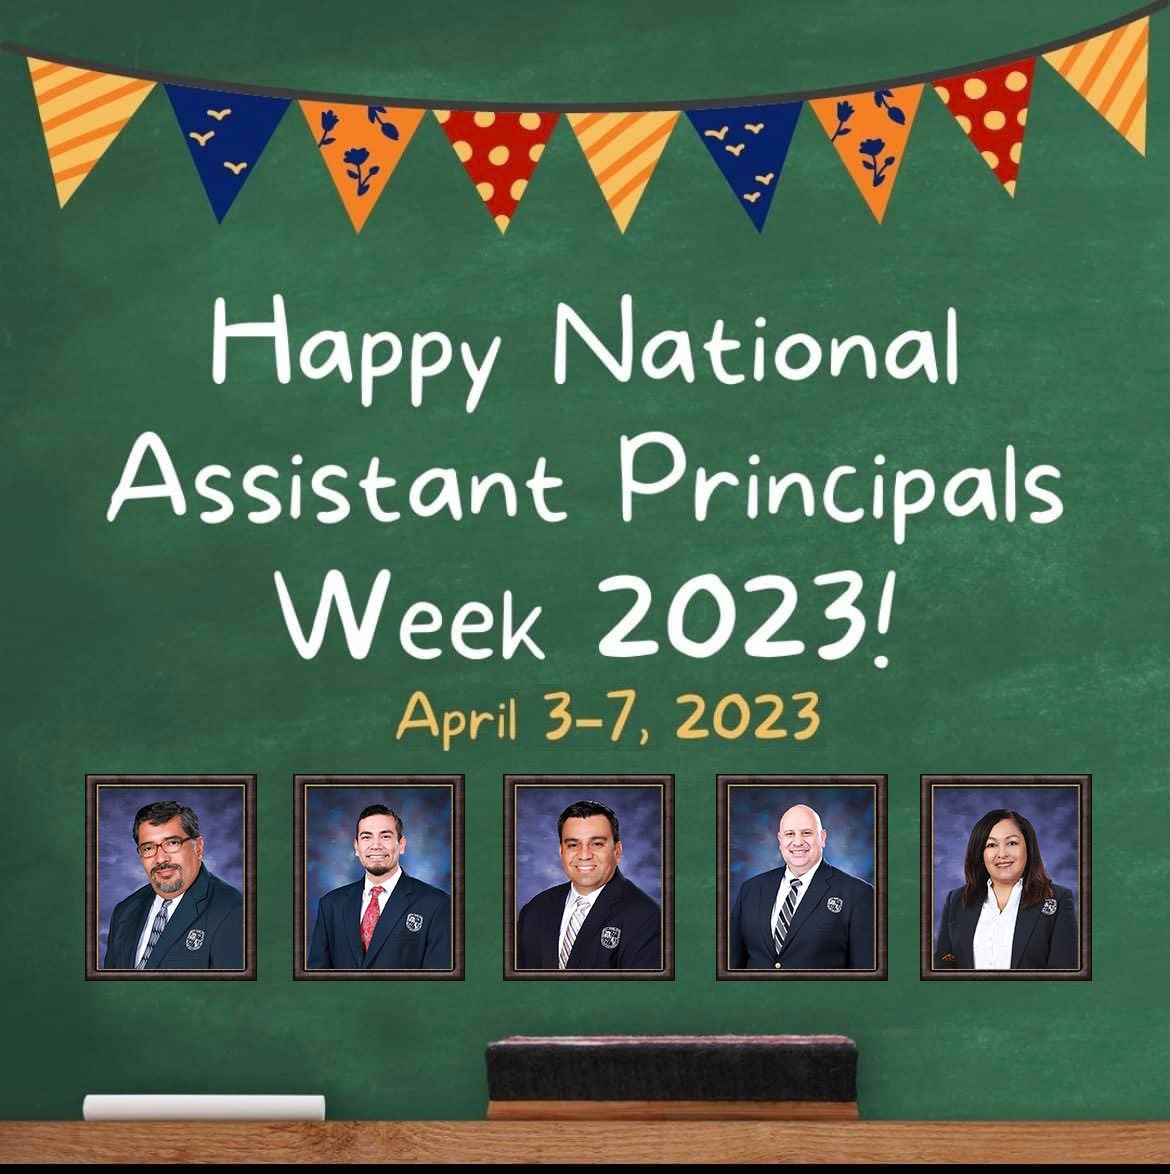 Happy National Assistant Principals Week to our amazing APs. We are beyond grateful for everything you do for our campus! We hope you enjoyed your week! #OFOD #ItsWhatWeDo #WeAreOne #ARatedCampus #BeBold #BeCourageous #BeTheChange #BeTHEDISTRICT @ysletaisd @IvanCedilloYISD